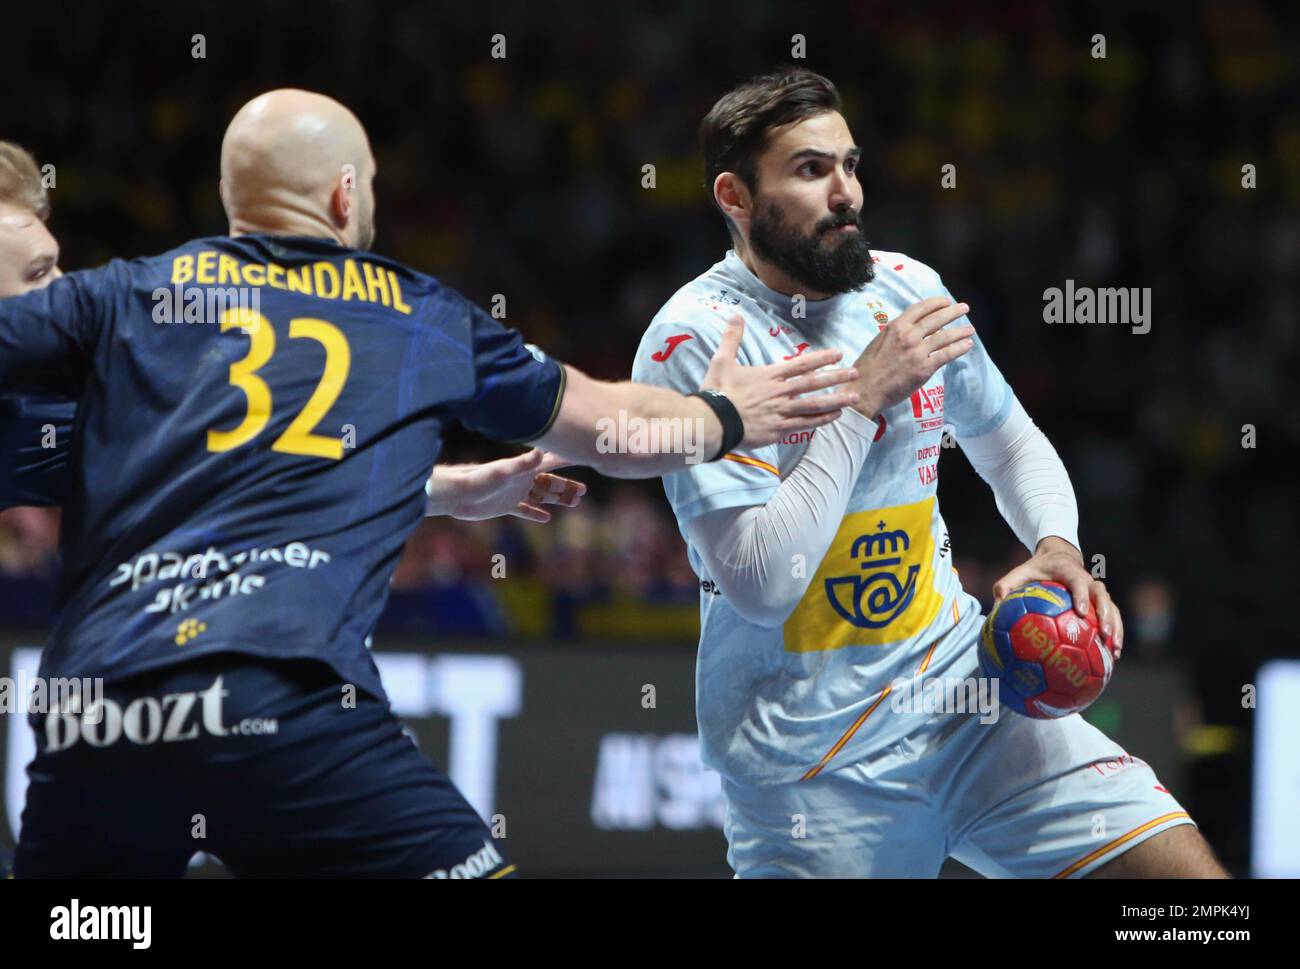 Jorge Maqueda Peno of Spain during the IHF Men's World Championship 2023, Placement matches 3-4, Handball match between Sweden and Spain on January 29, 2023 at Tele2 Arena in Stockholm, Sweden - Photo: Laurent Lairys/DPPI/LiveMedia Stock Photo